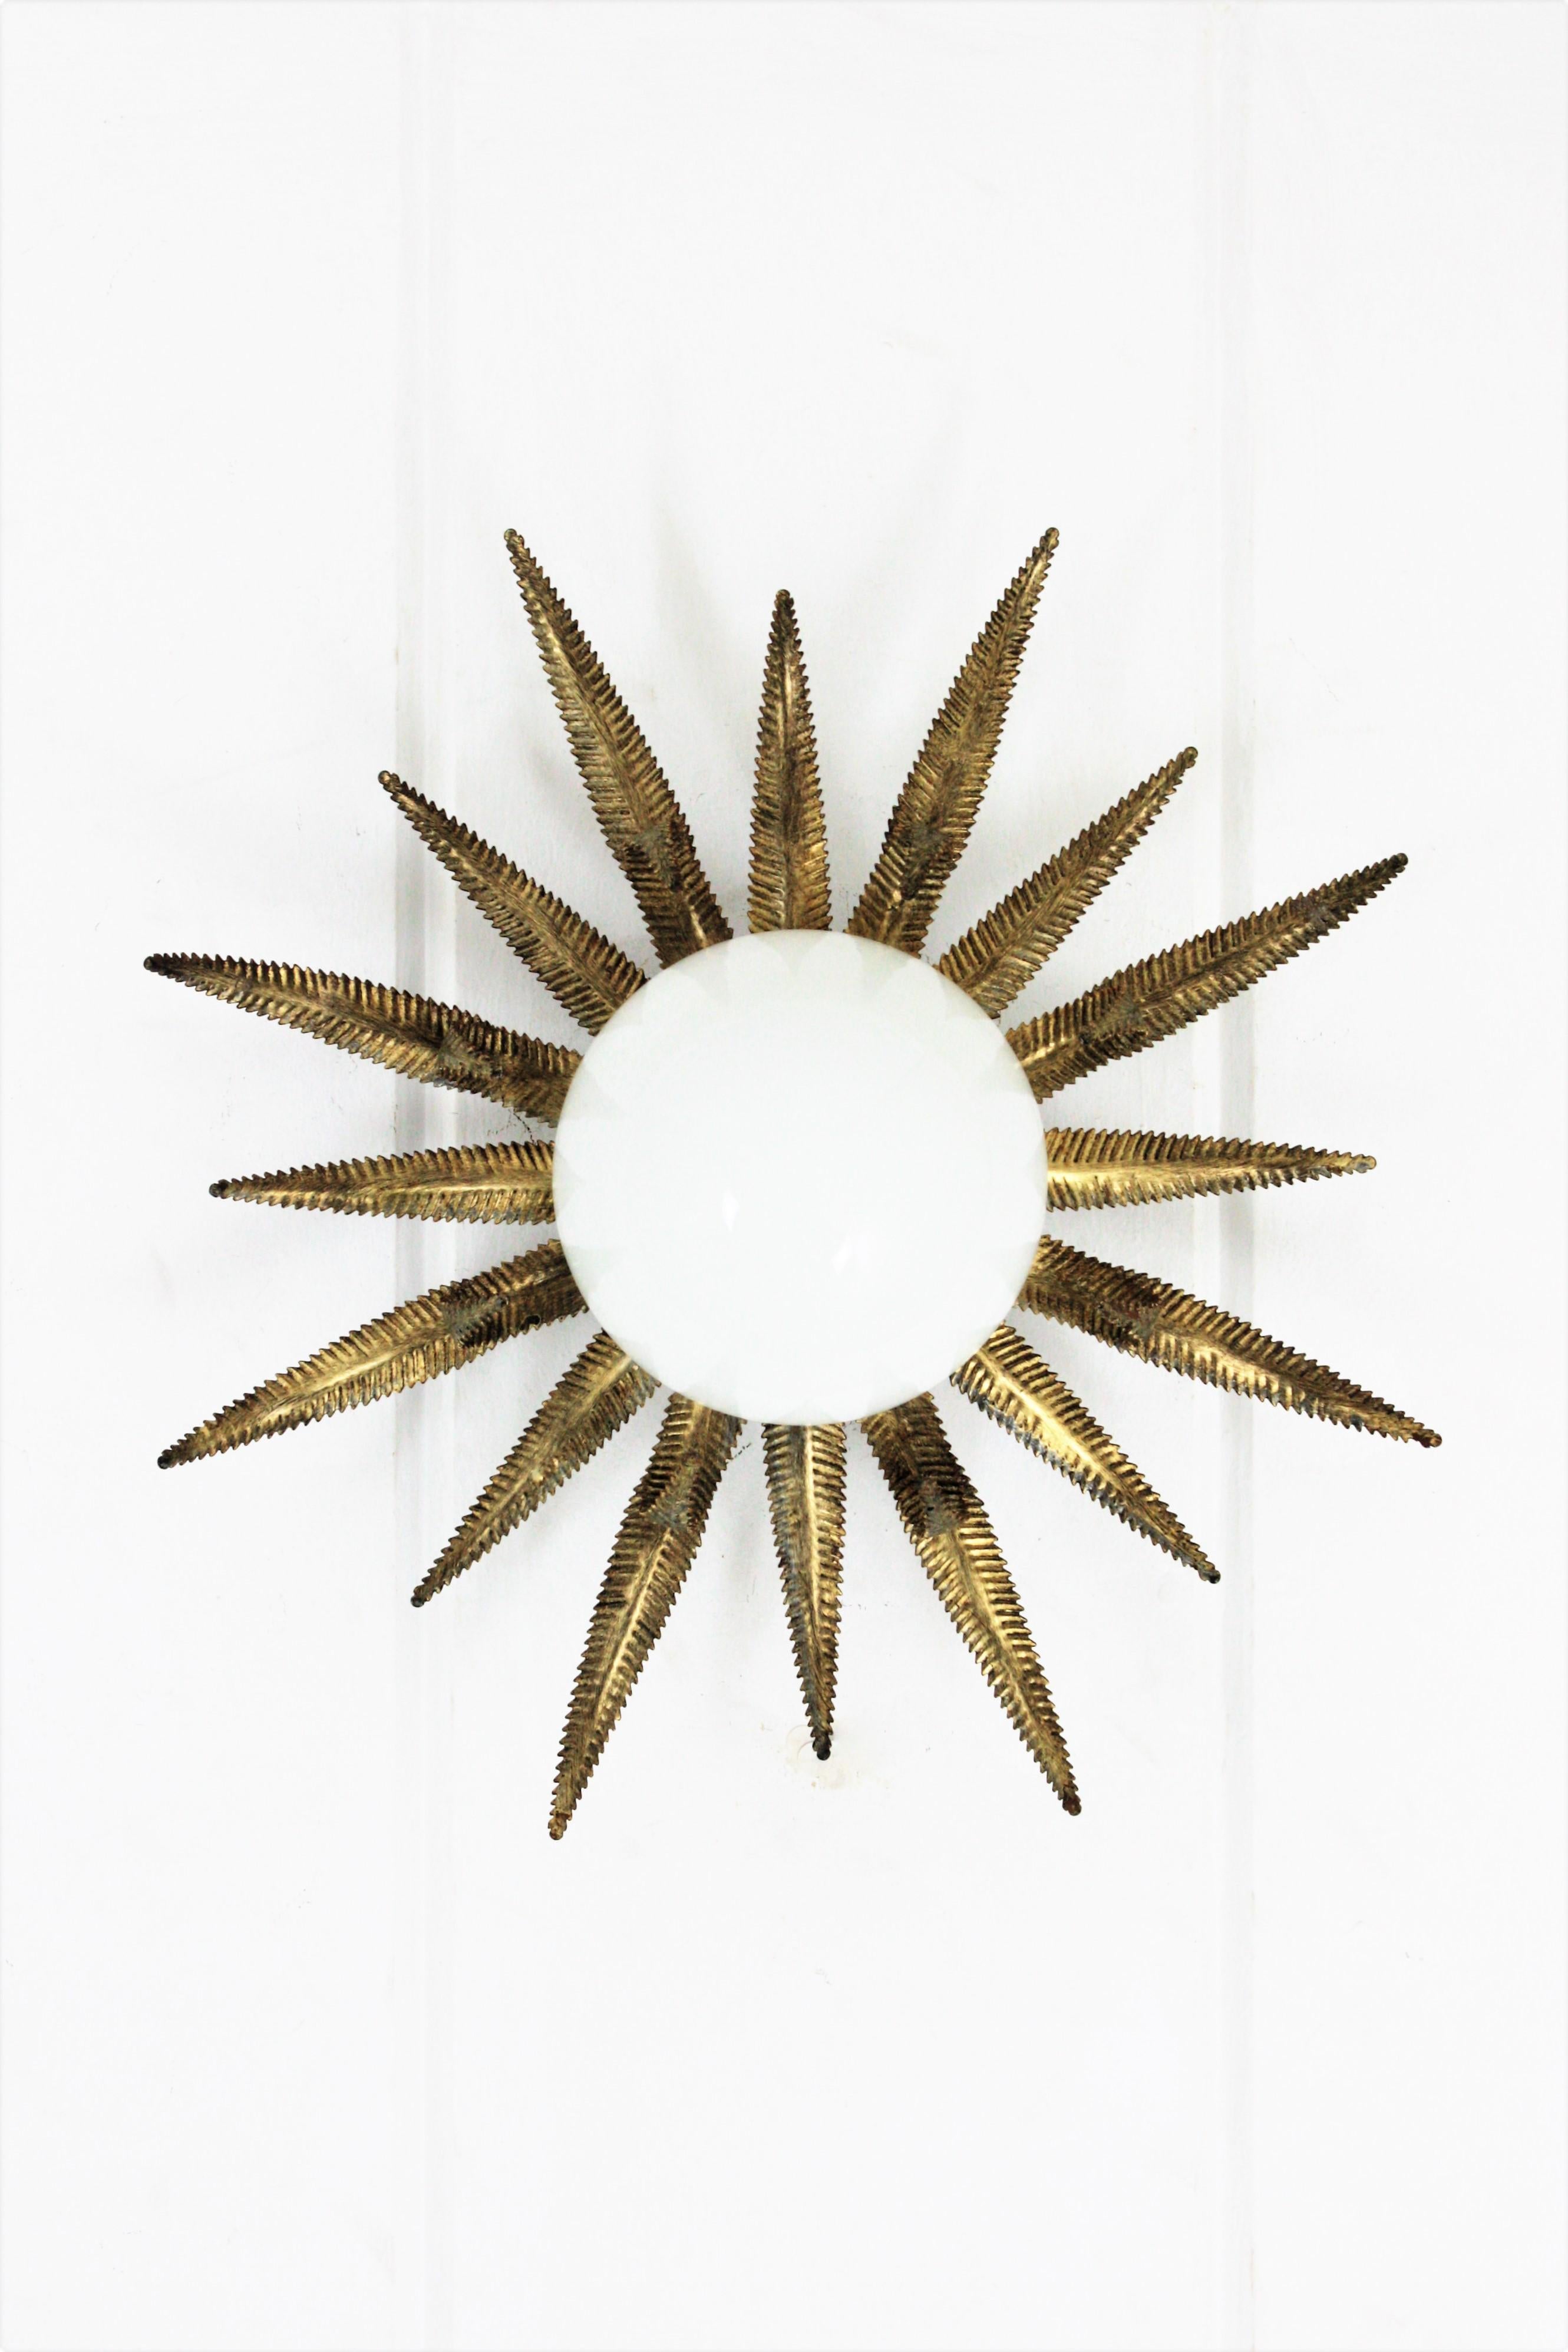 Outstanding French sunburst flush mount in gilt metal and milk glass, 1950s
This Sunburst starburst ceiling light fixture has an eye-catching construction. The sunburst backplace in patinated gilt and sunburst or starburst shape holds a